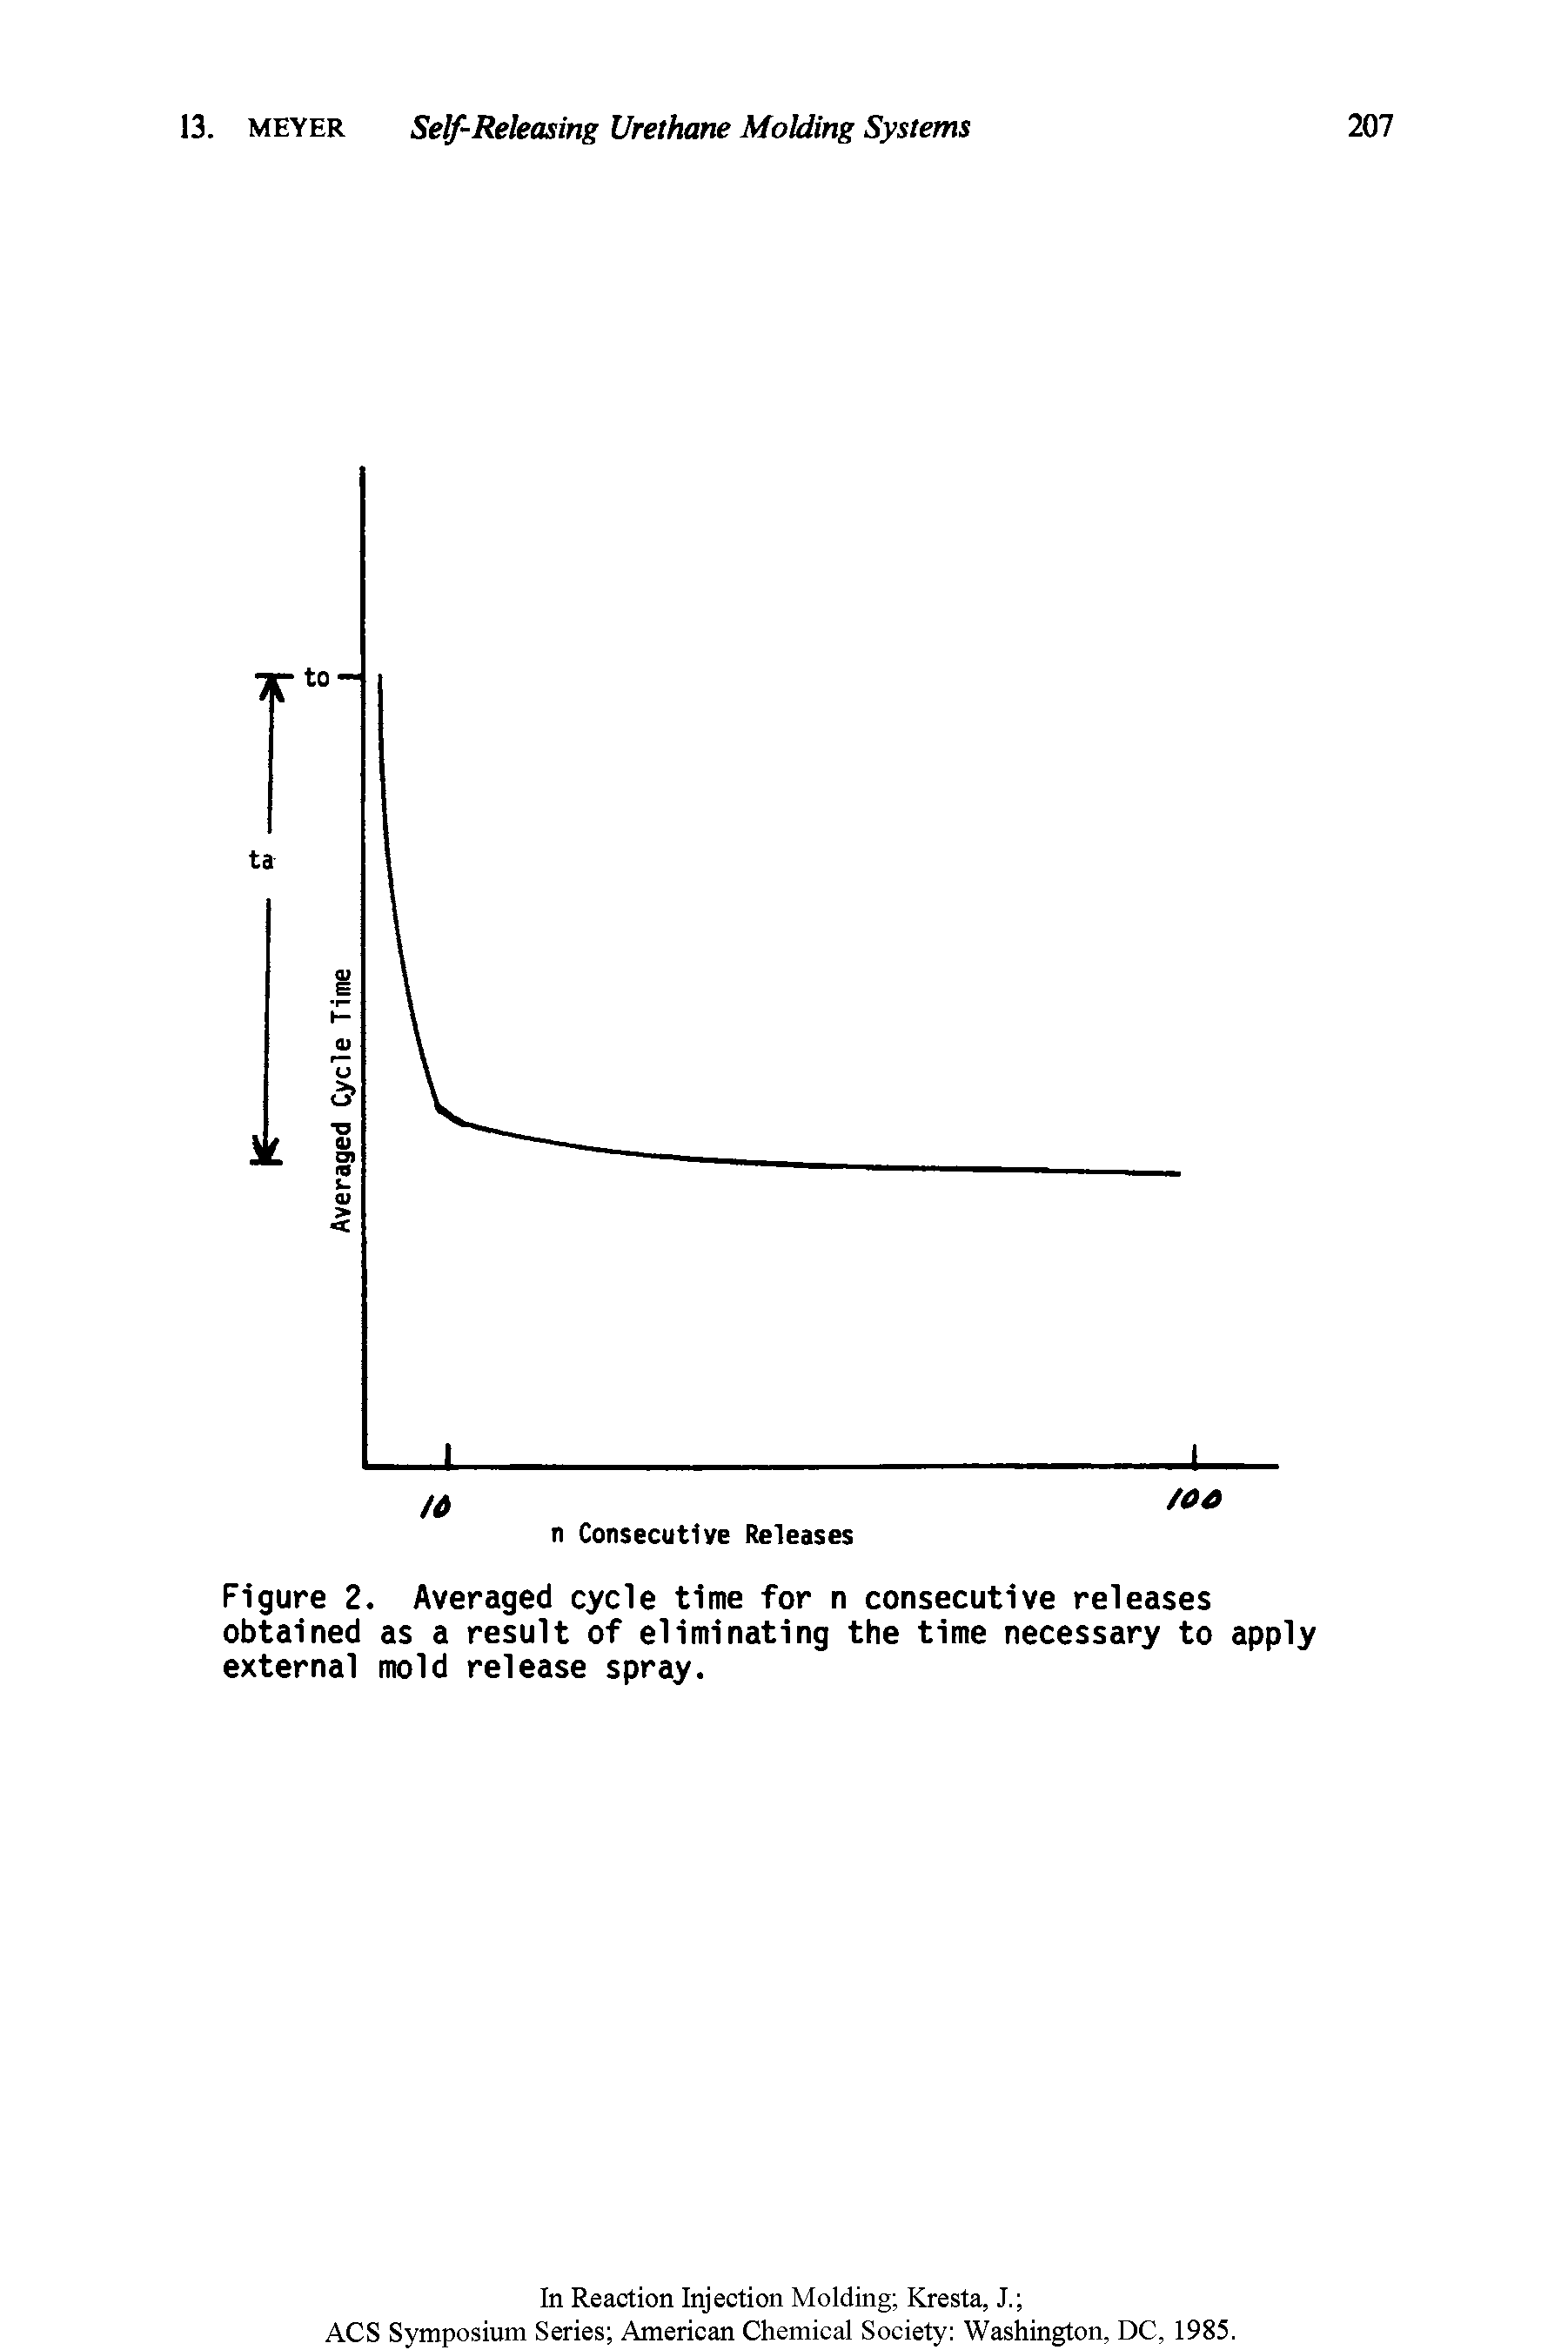 Figure 2. Averaged cycle time for n consecutive releases obtained as a result of eliminating the time necessary to apply external mold release spray.